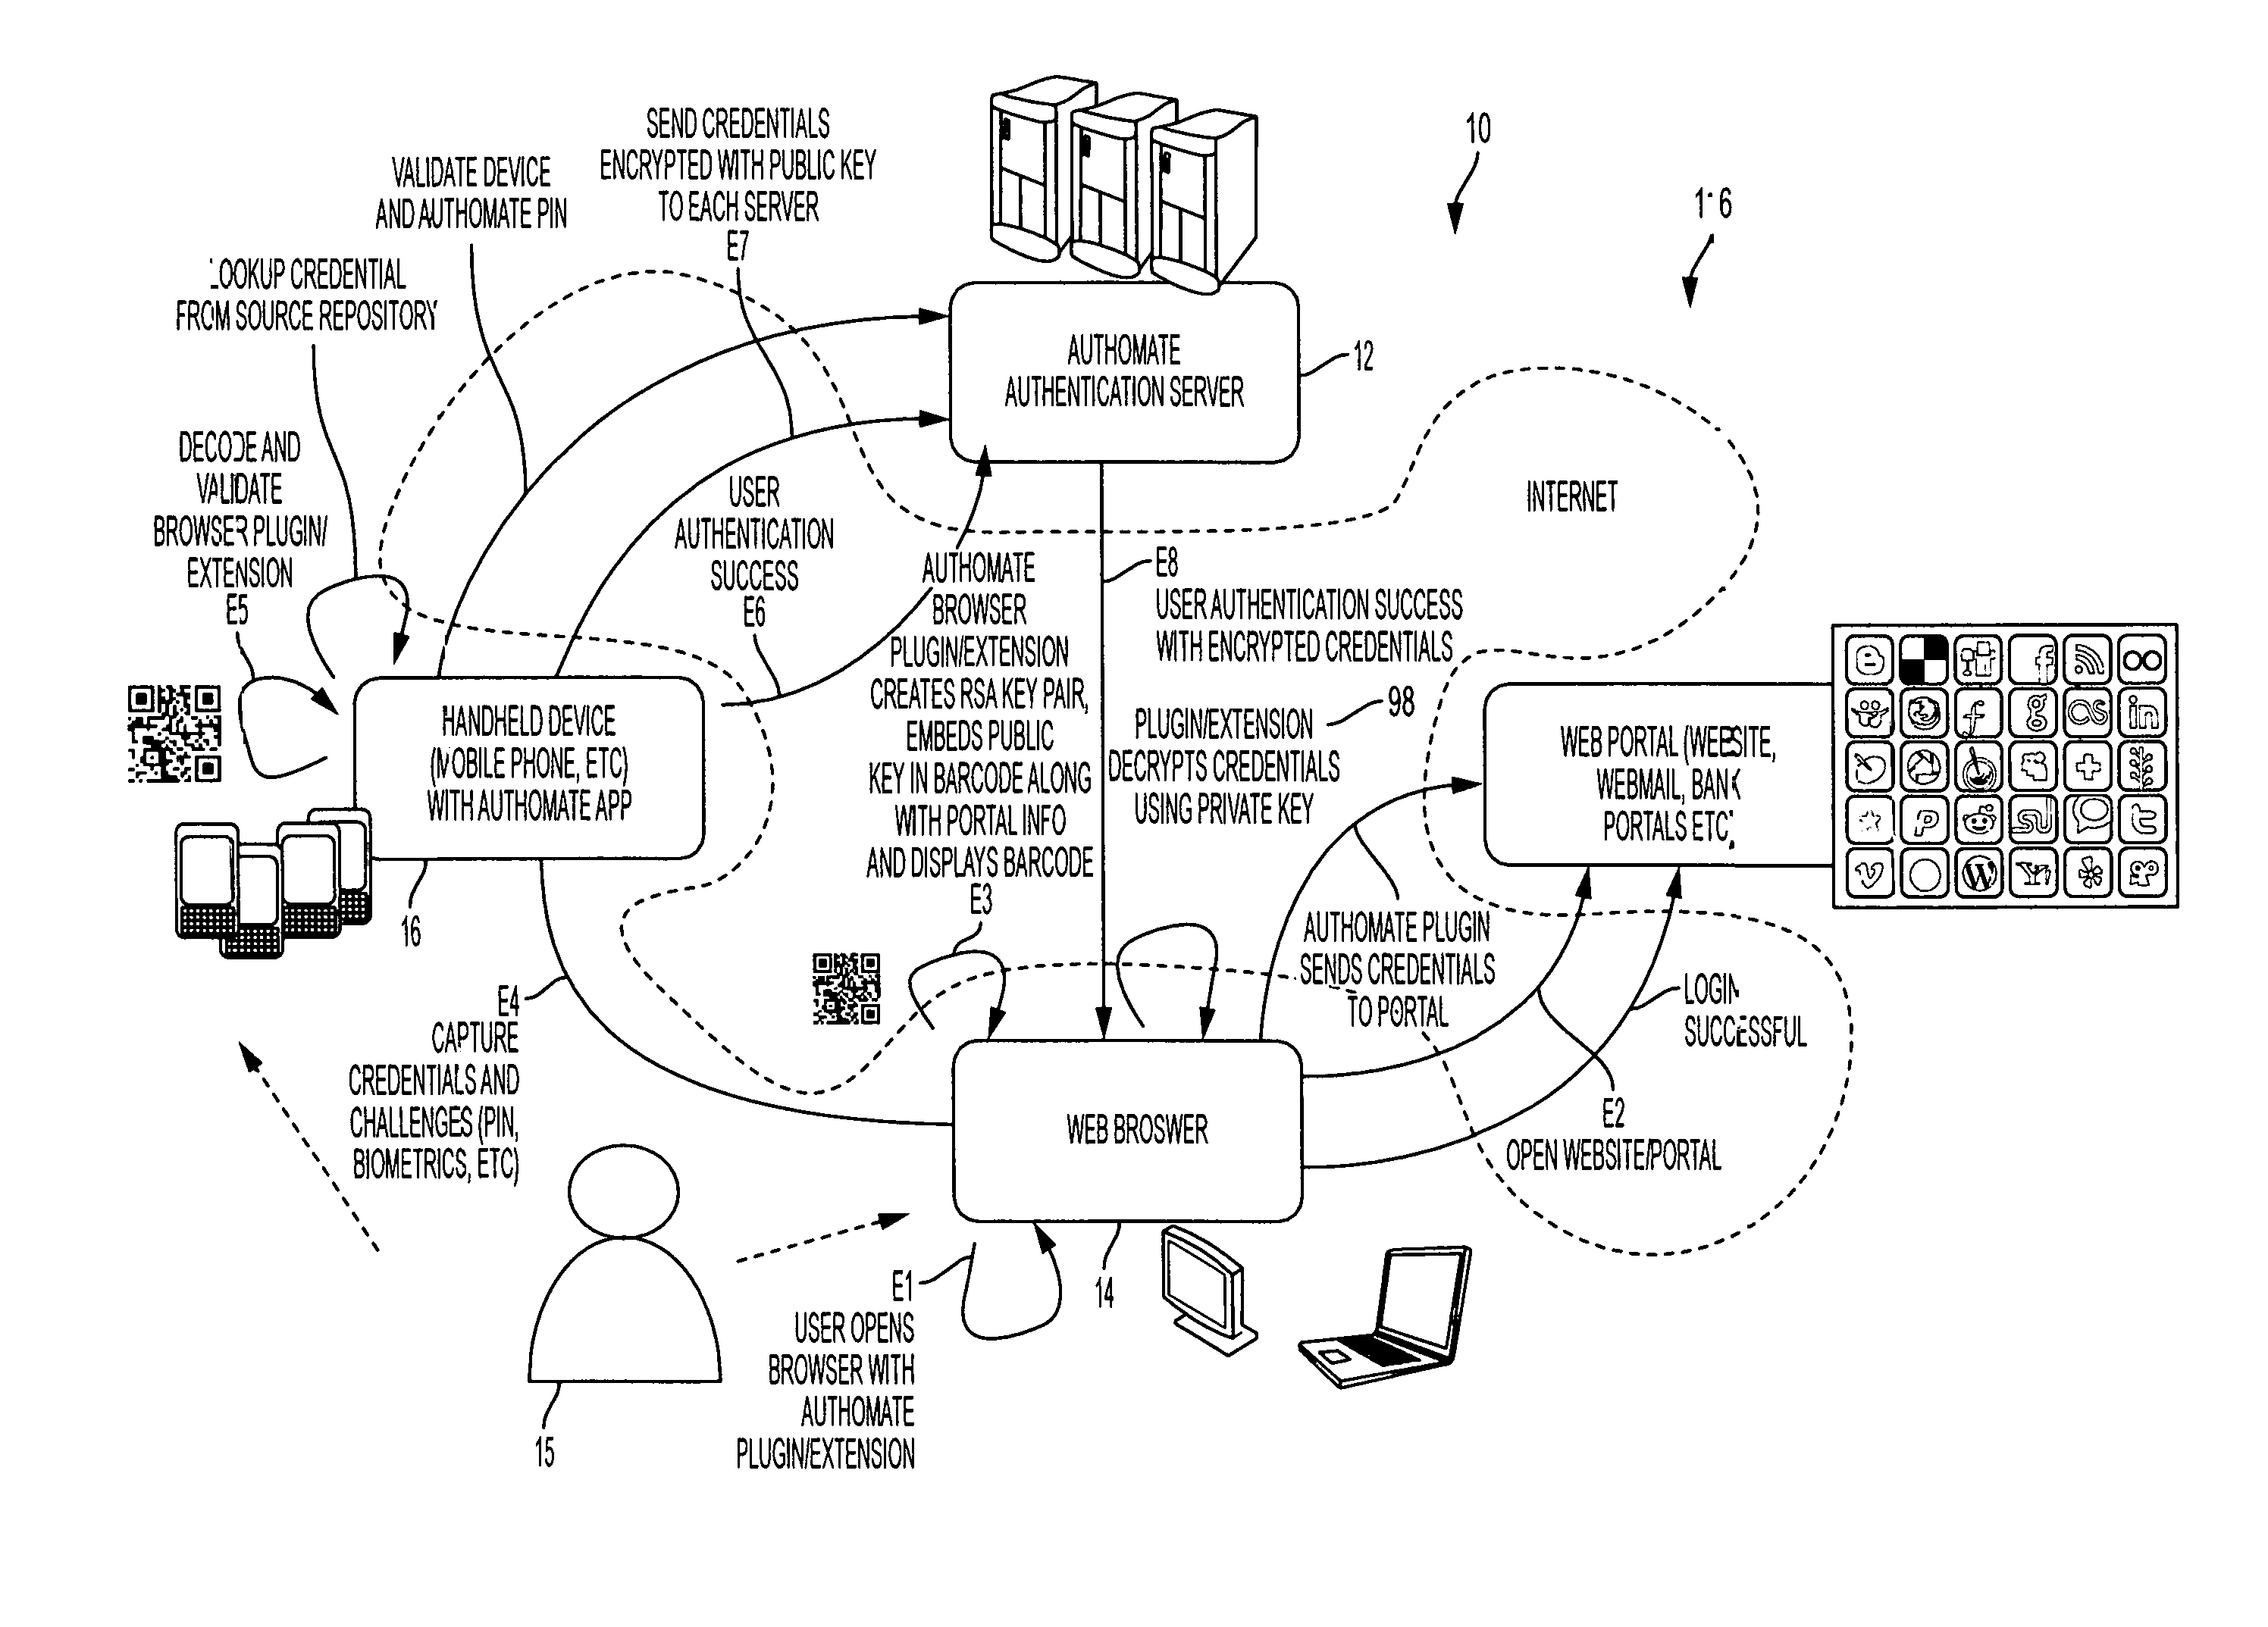 System, Design and Process for Secure Documents Credentials Management Using Out-of-Band Authentication